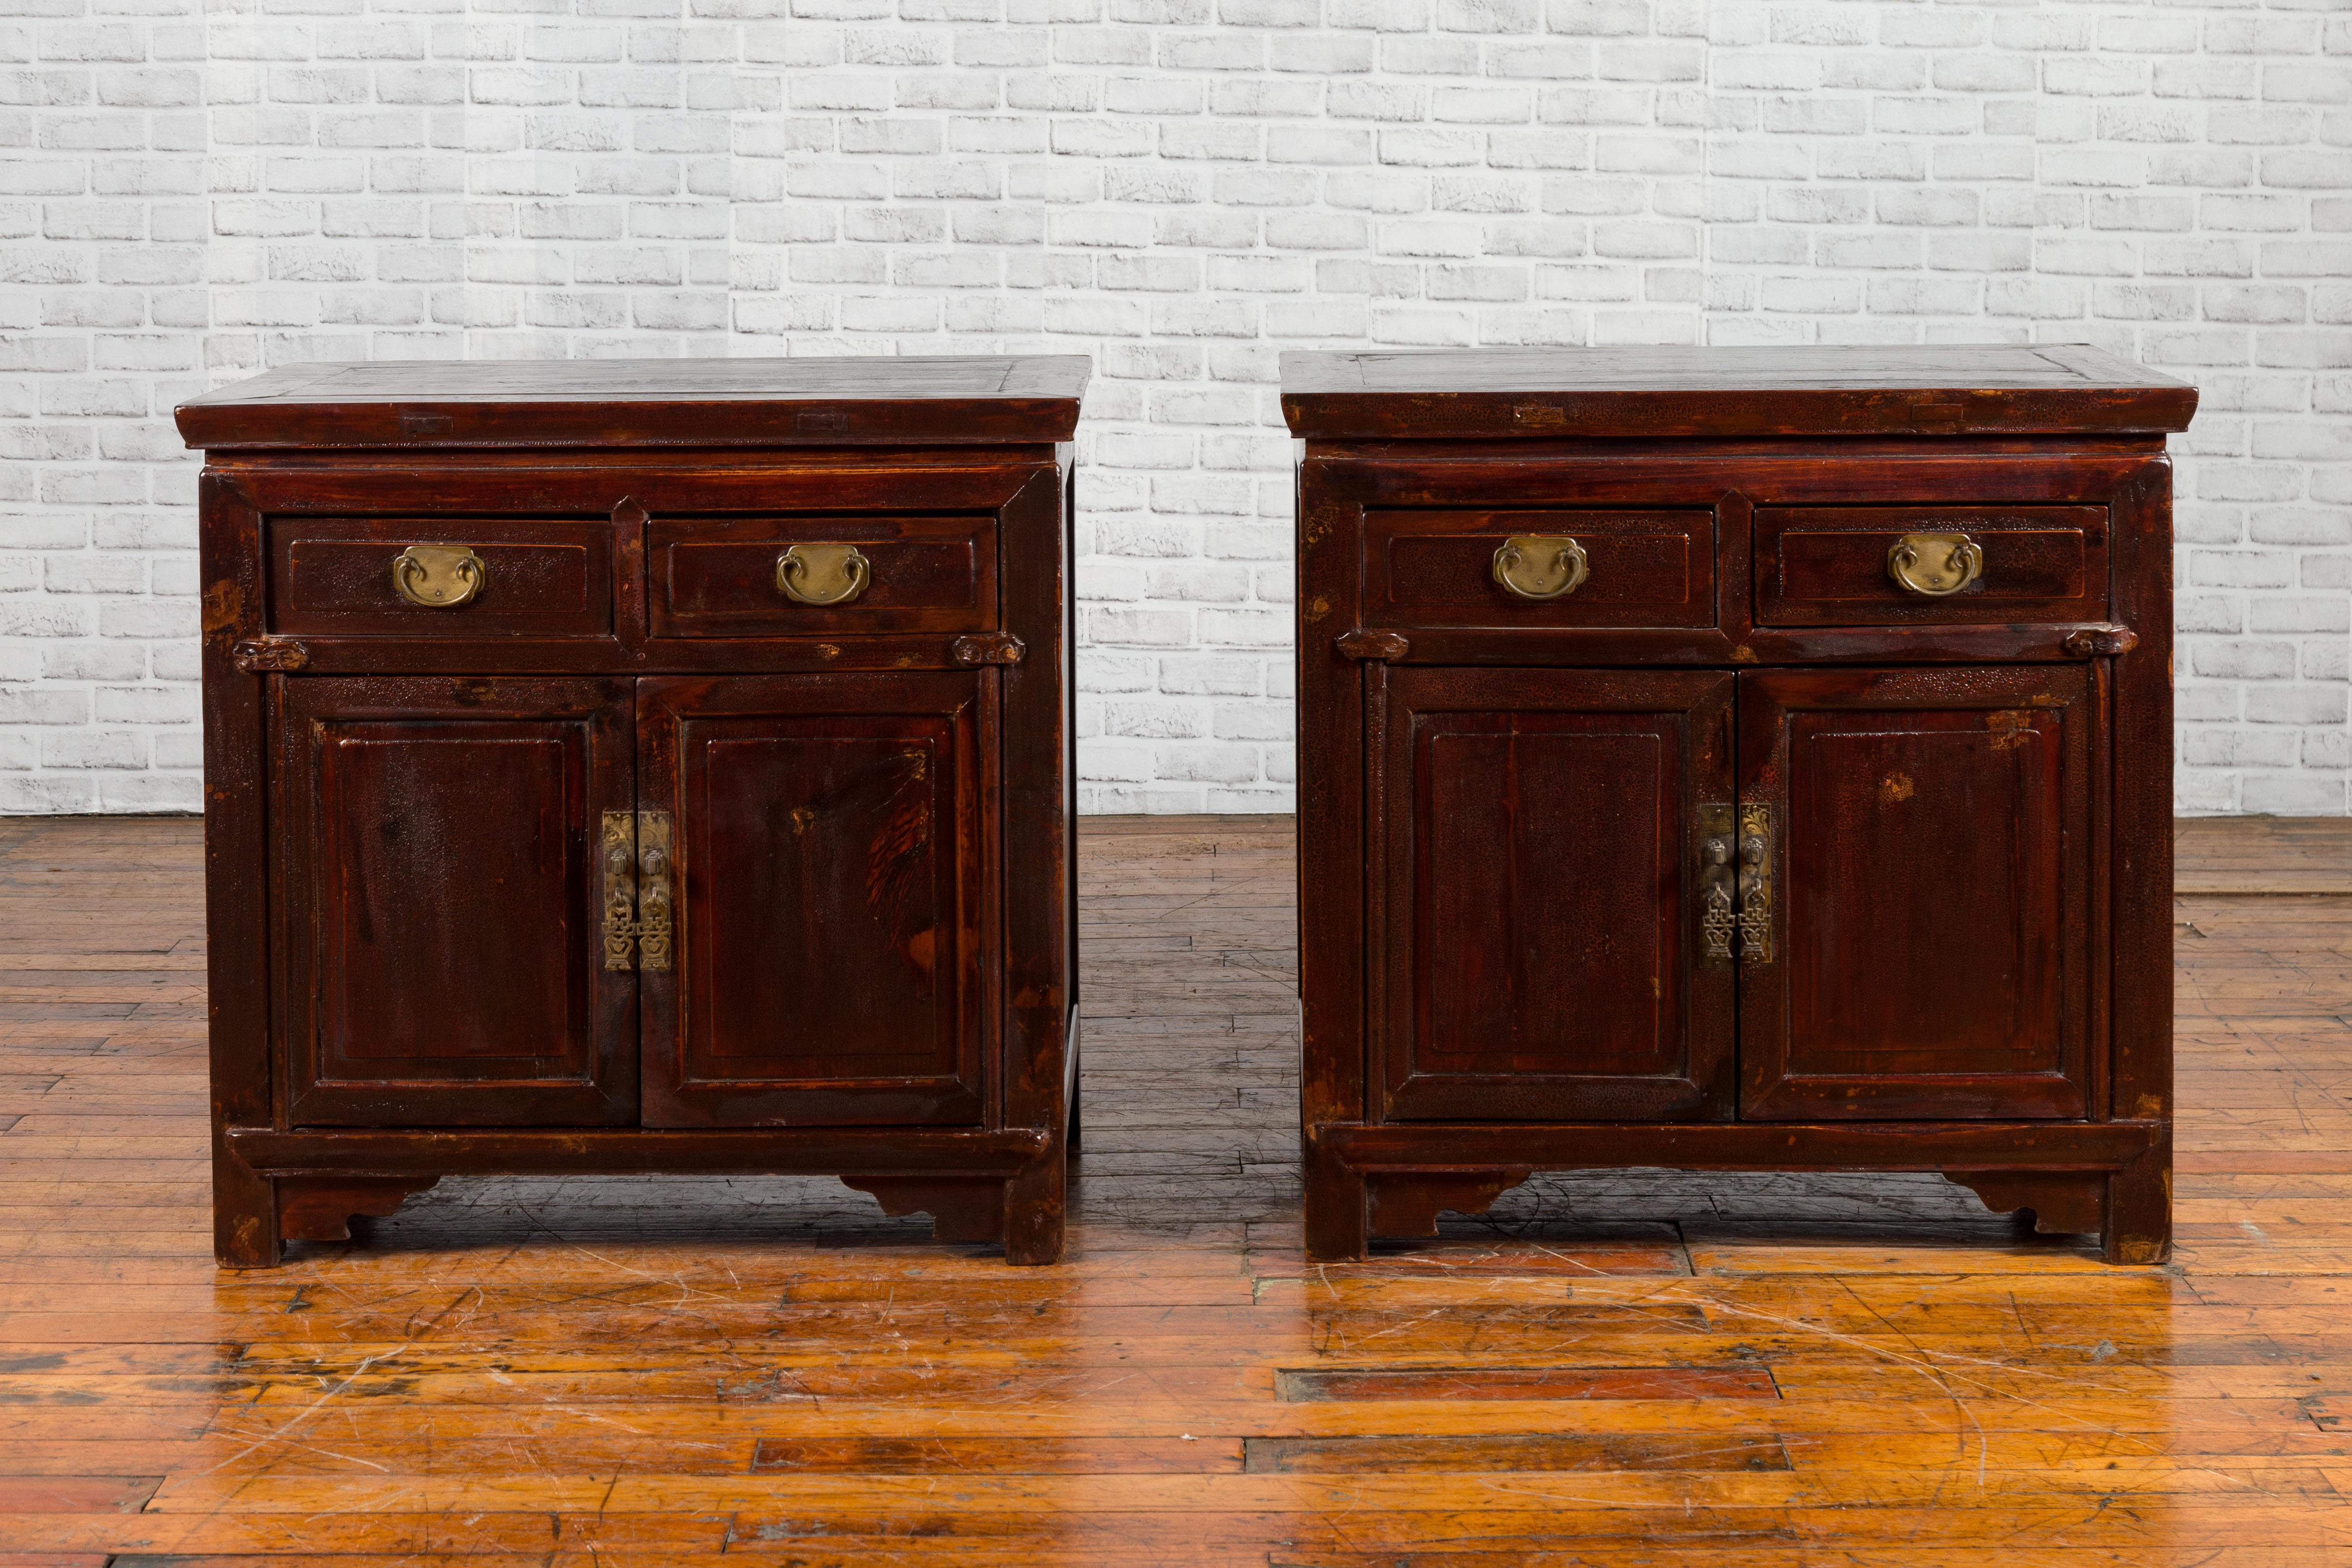 A pair of Chinese antique bedside cabinets from the early 20th century, with drawers, doors, brass fittings and reddish brown lacquer. Created in China during the early years of the 20th century, each of this pair of bedside cabinets features a